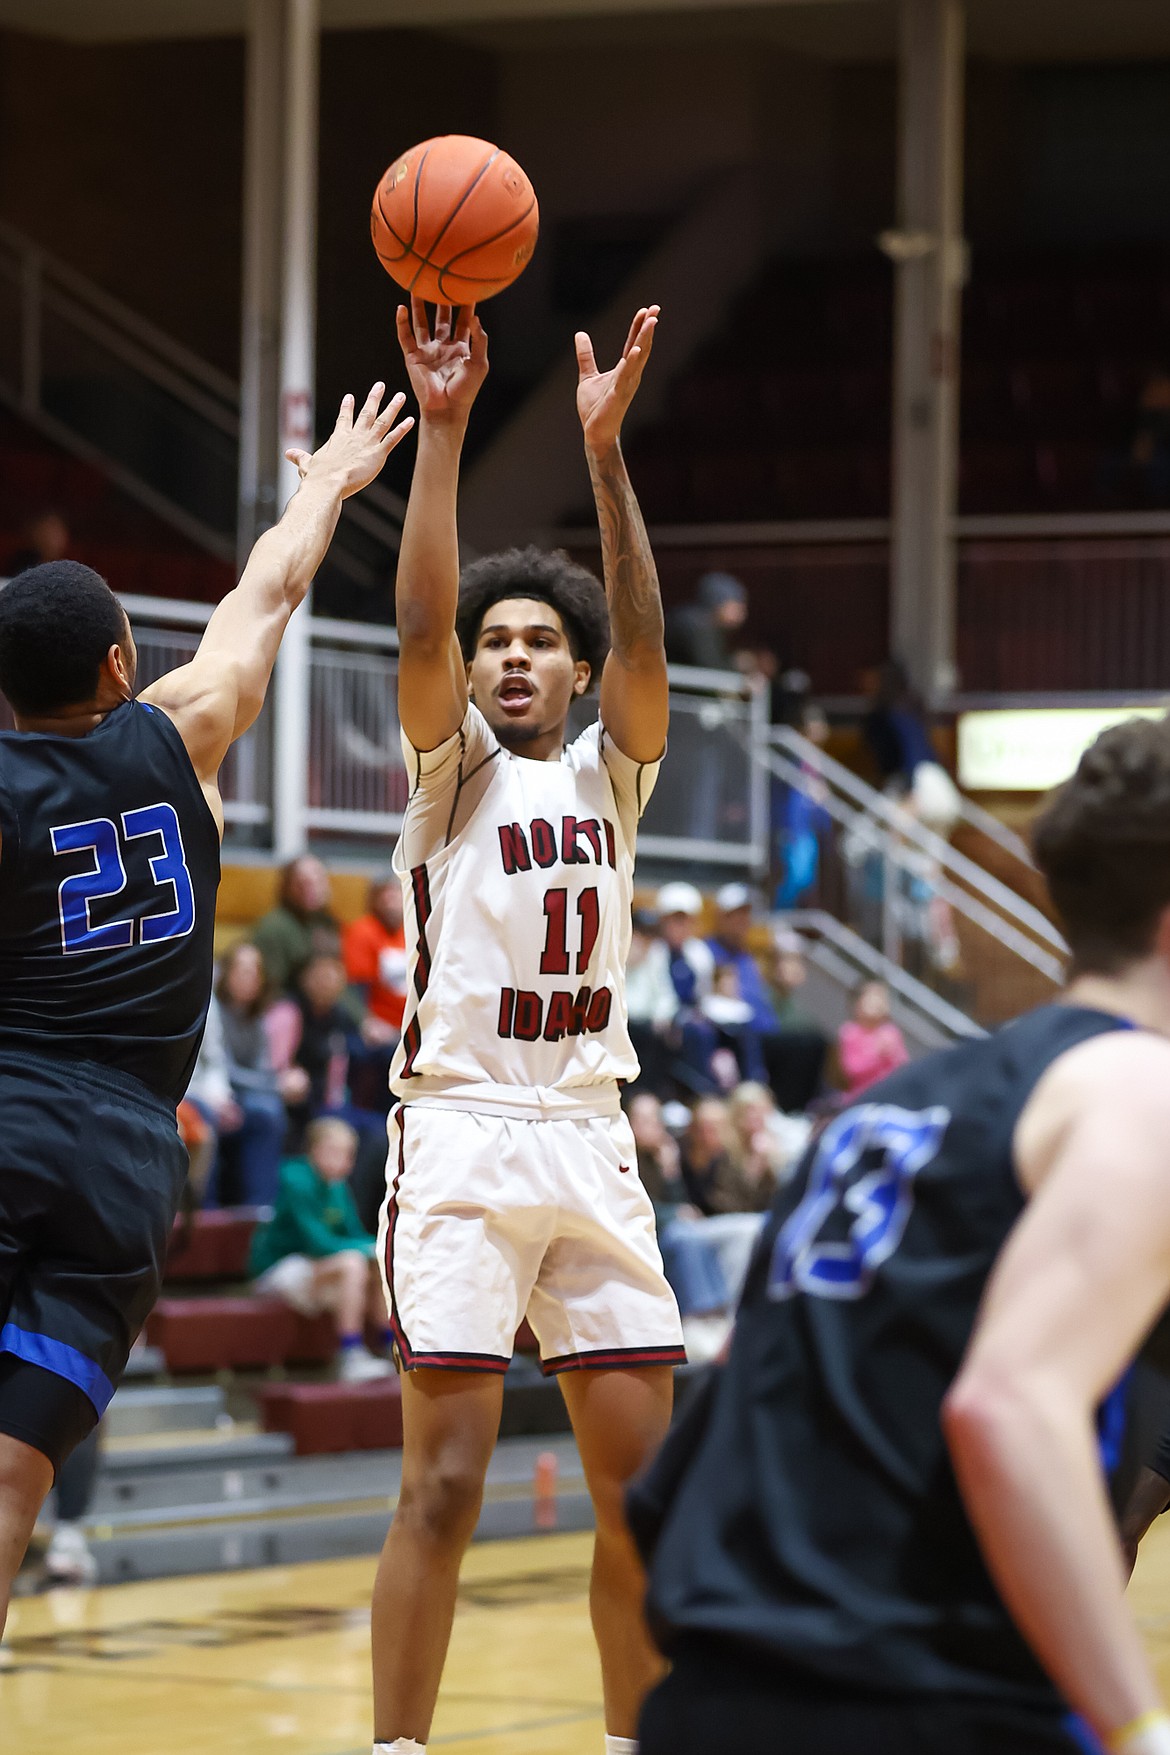 KYLE DISHAW PHOTOGRAPHY
North Idaho College sophomore guard Dante Sawyer puts up a shot during a Jan. 12 game against Salt Lake at Rolly Williams Court. NIC will face Salt Lake in the opening round of the Region 18 men's basketball tournament on Friday in Taylorsville, Utah.